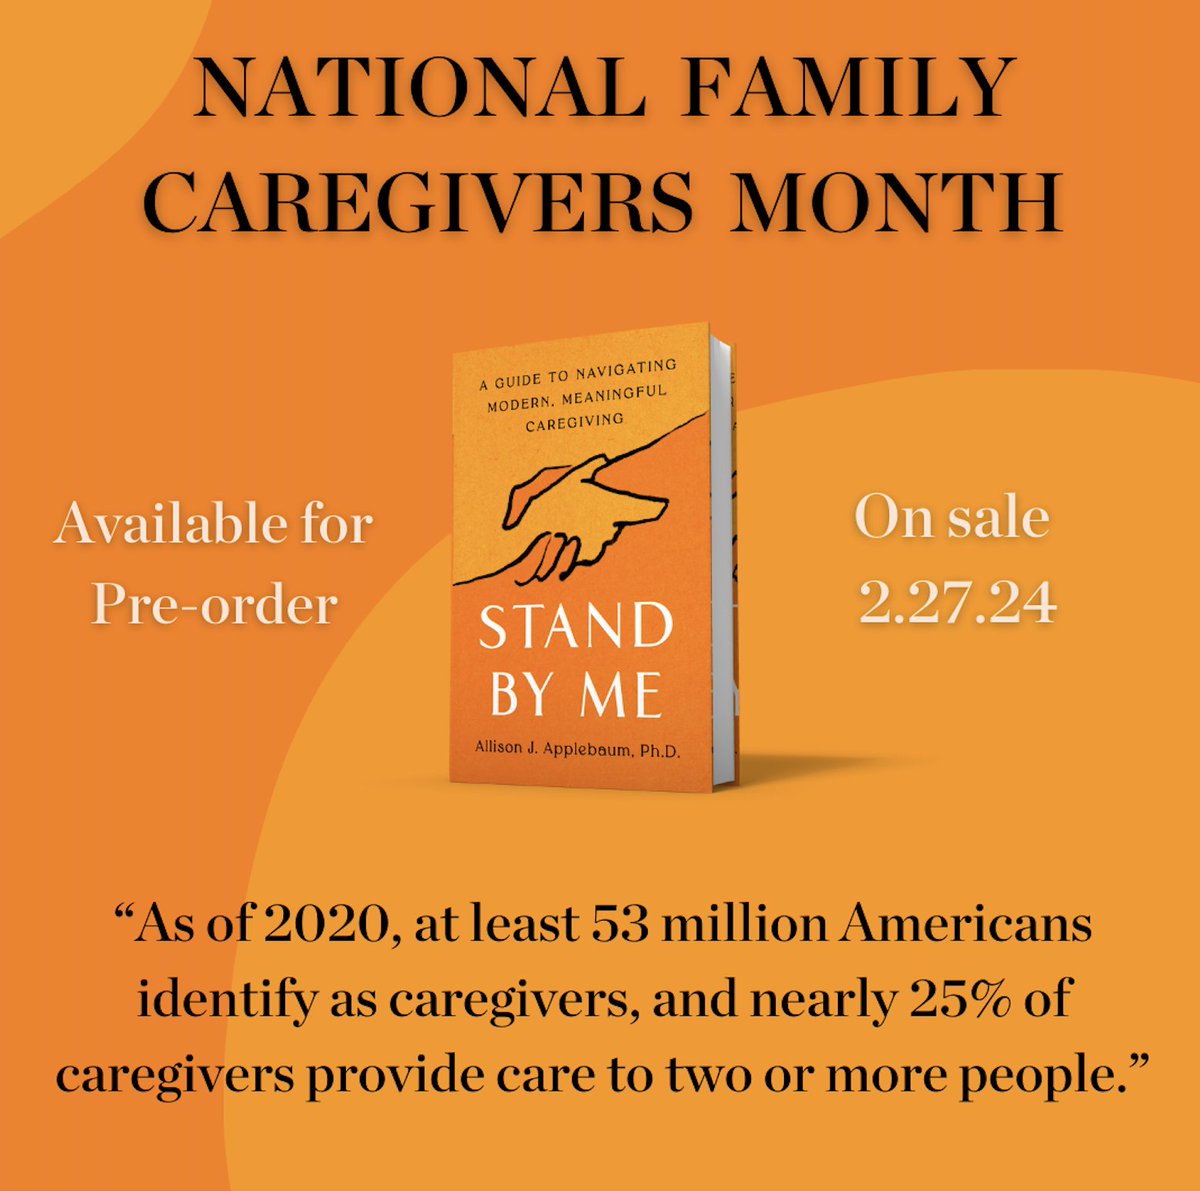 As Nov. marks National Family Caregivers Month, we were eager to share more about our upcoming release by the founder of the only devoted Caregivers Clinic in the country, clinical psychologist @DocApplebaum. STAND BY ME hits shelves 2.27.24 and can be preordered now!